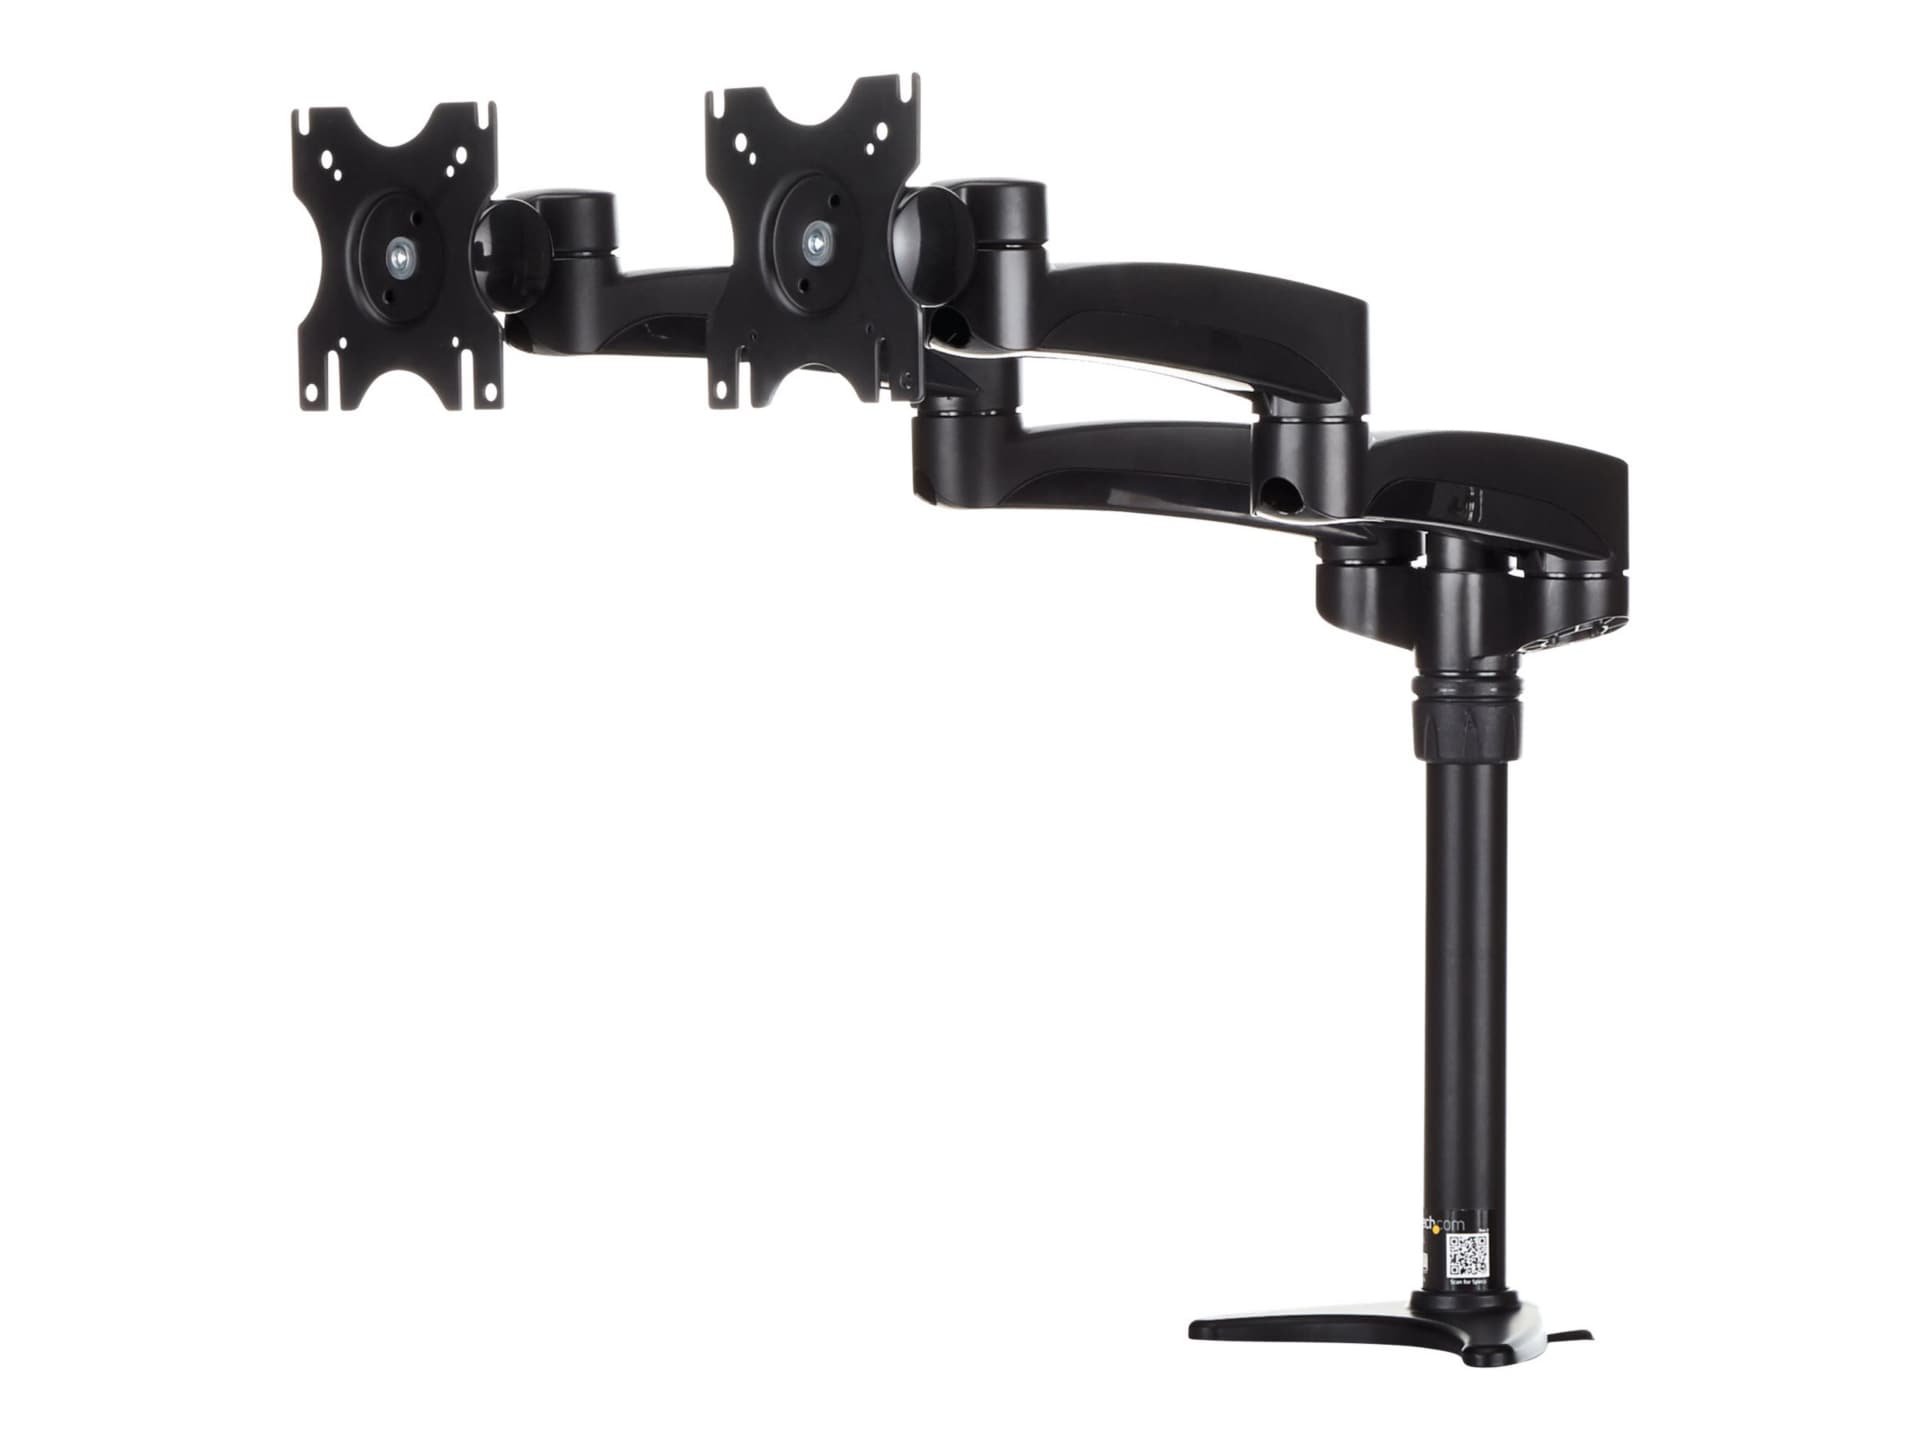 StarTech.com Desk Mount Dual Monitor Arm, Dual Articulating Monitor Arm, Height Adjustable, For VESA Monitors up to 24"